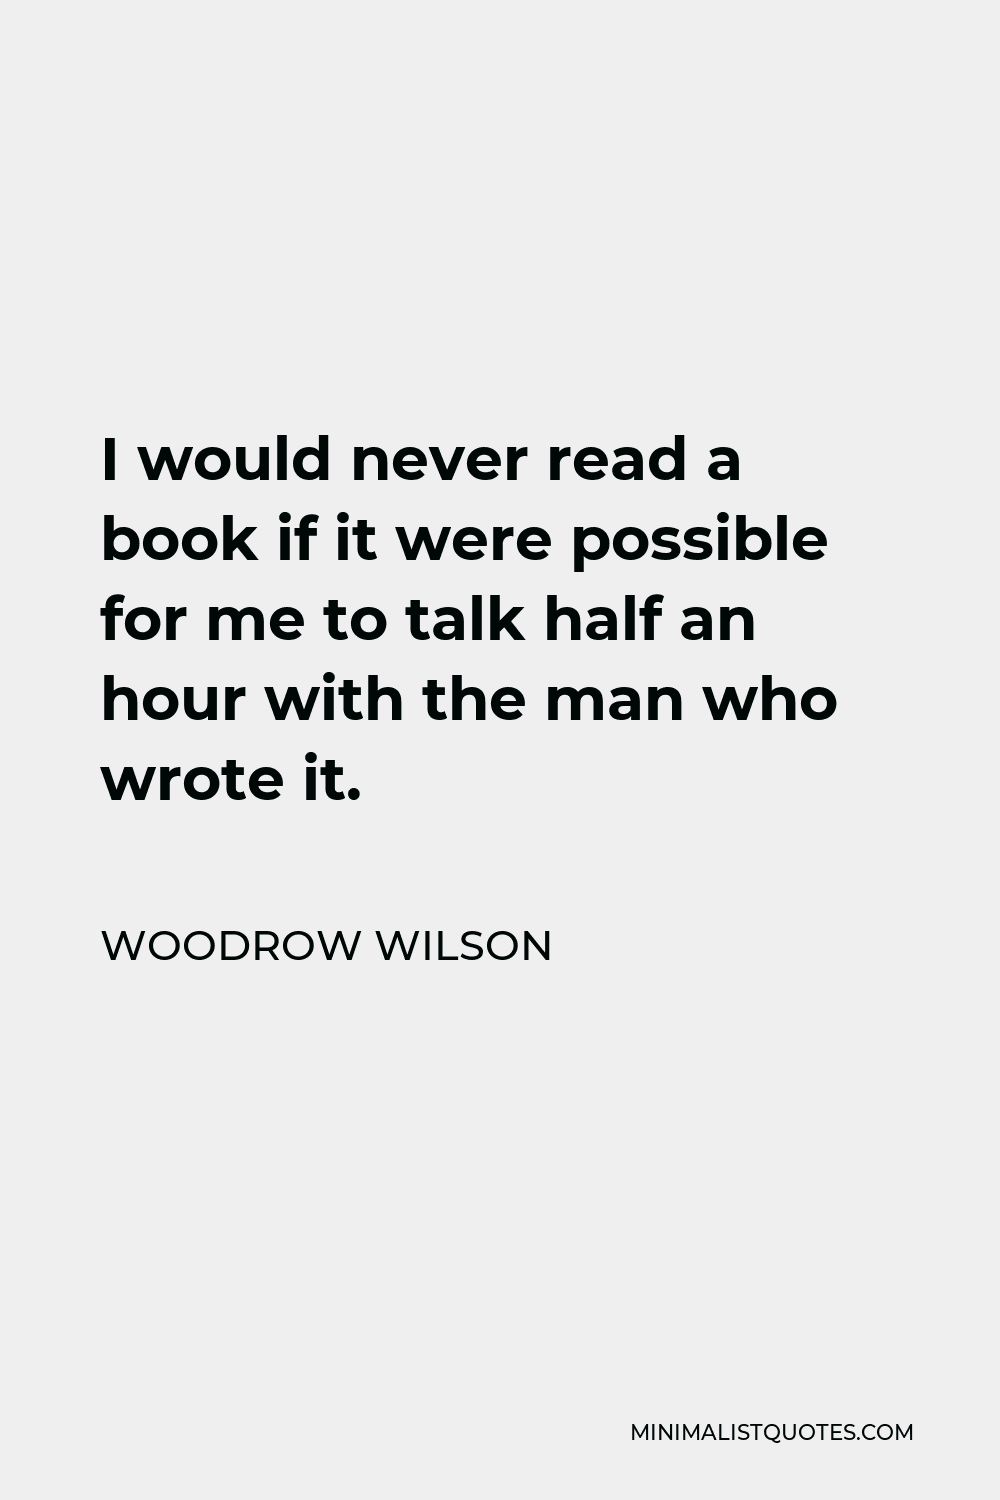 Woodrow Wilson Quote - I would never read a book if it were possible for me to talk half an hour with the man who wrote it.